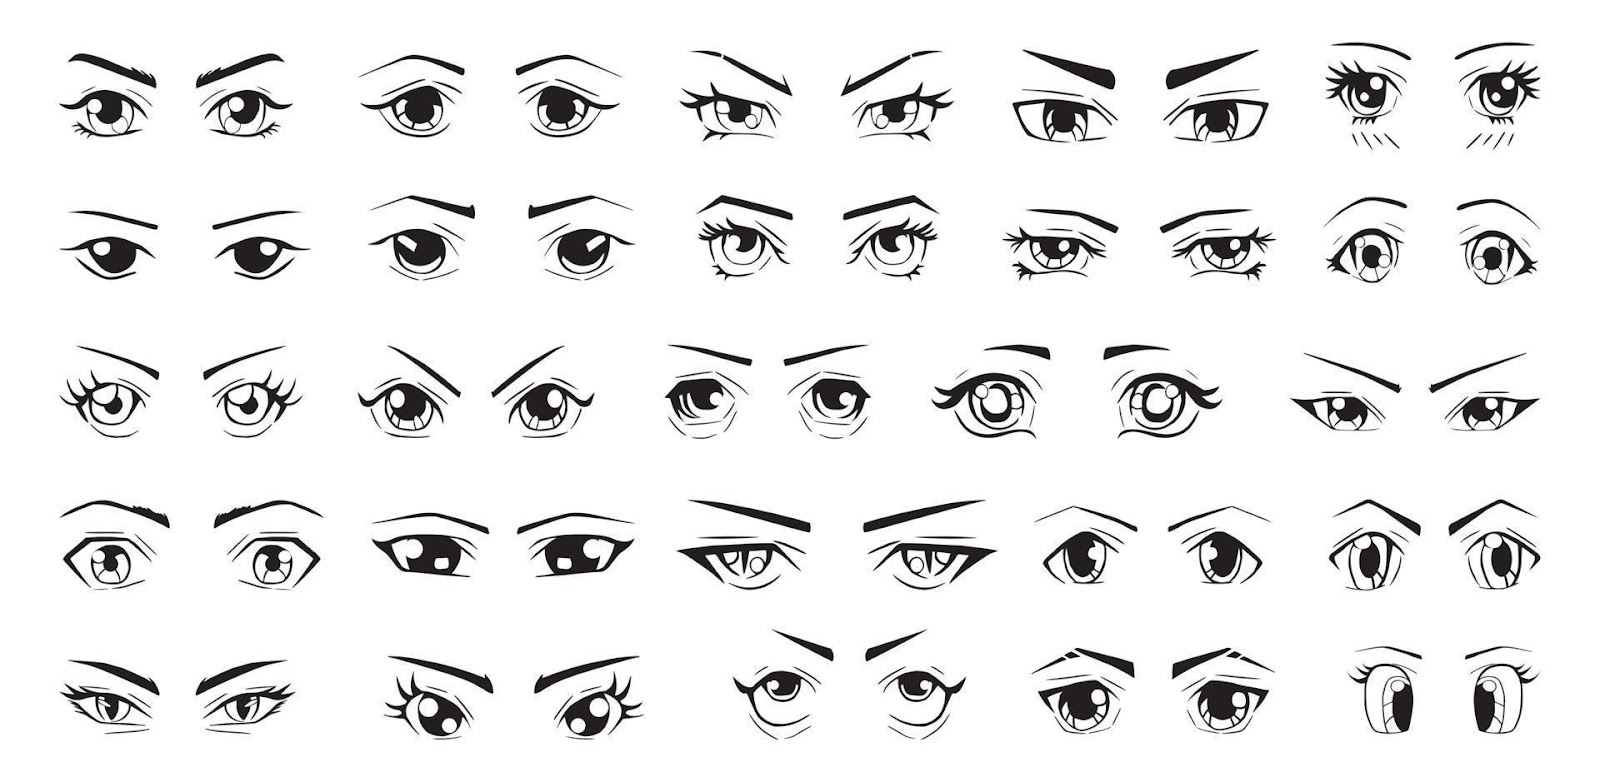 25 different drawings of anime eye styles